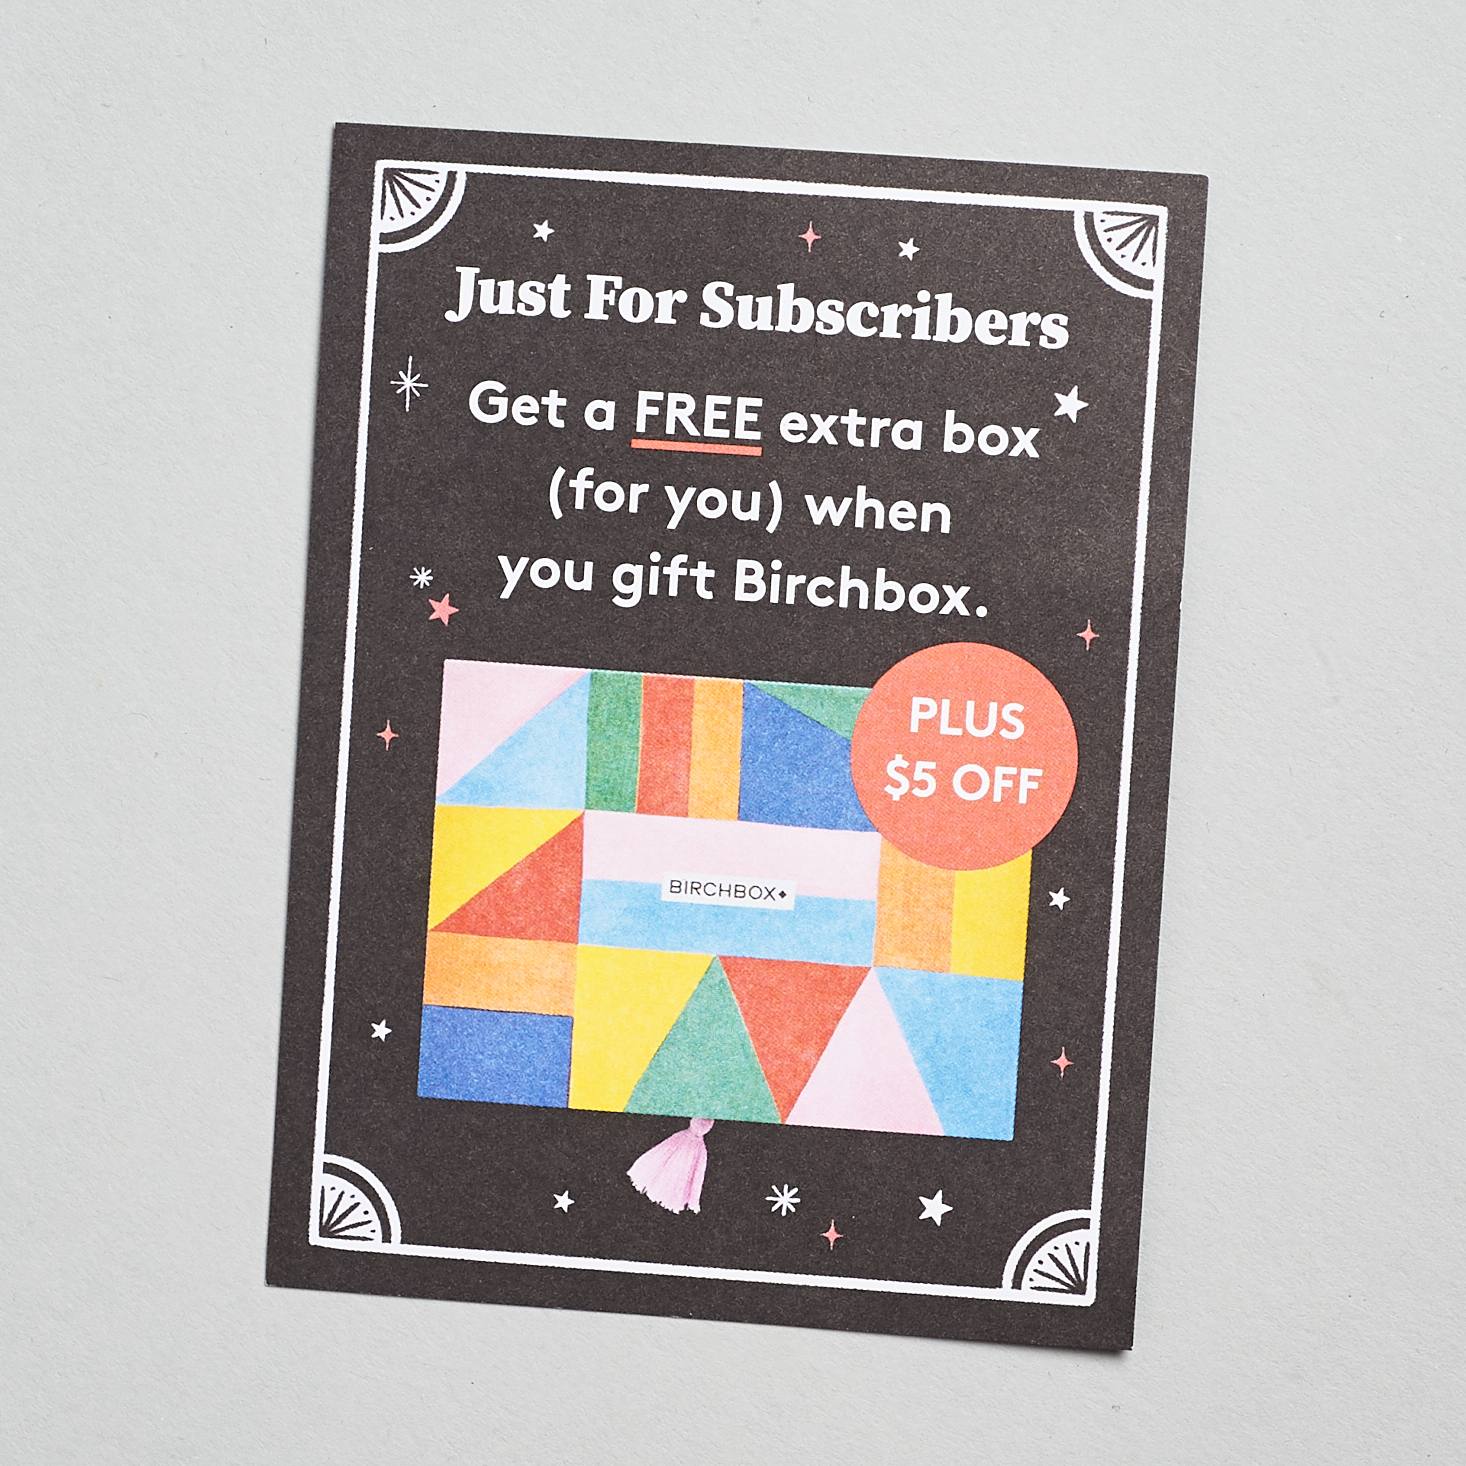 $5 off + free box when you buy a gift subscription